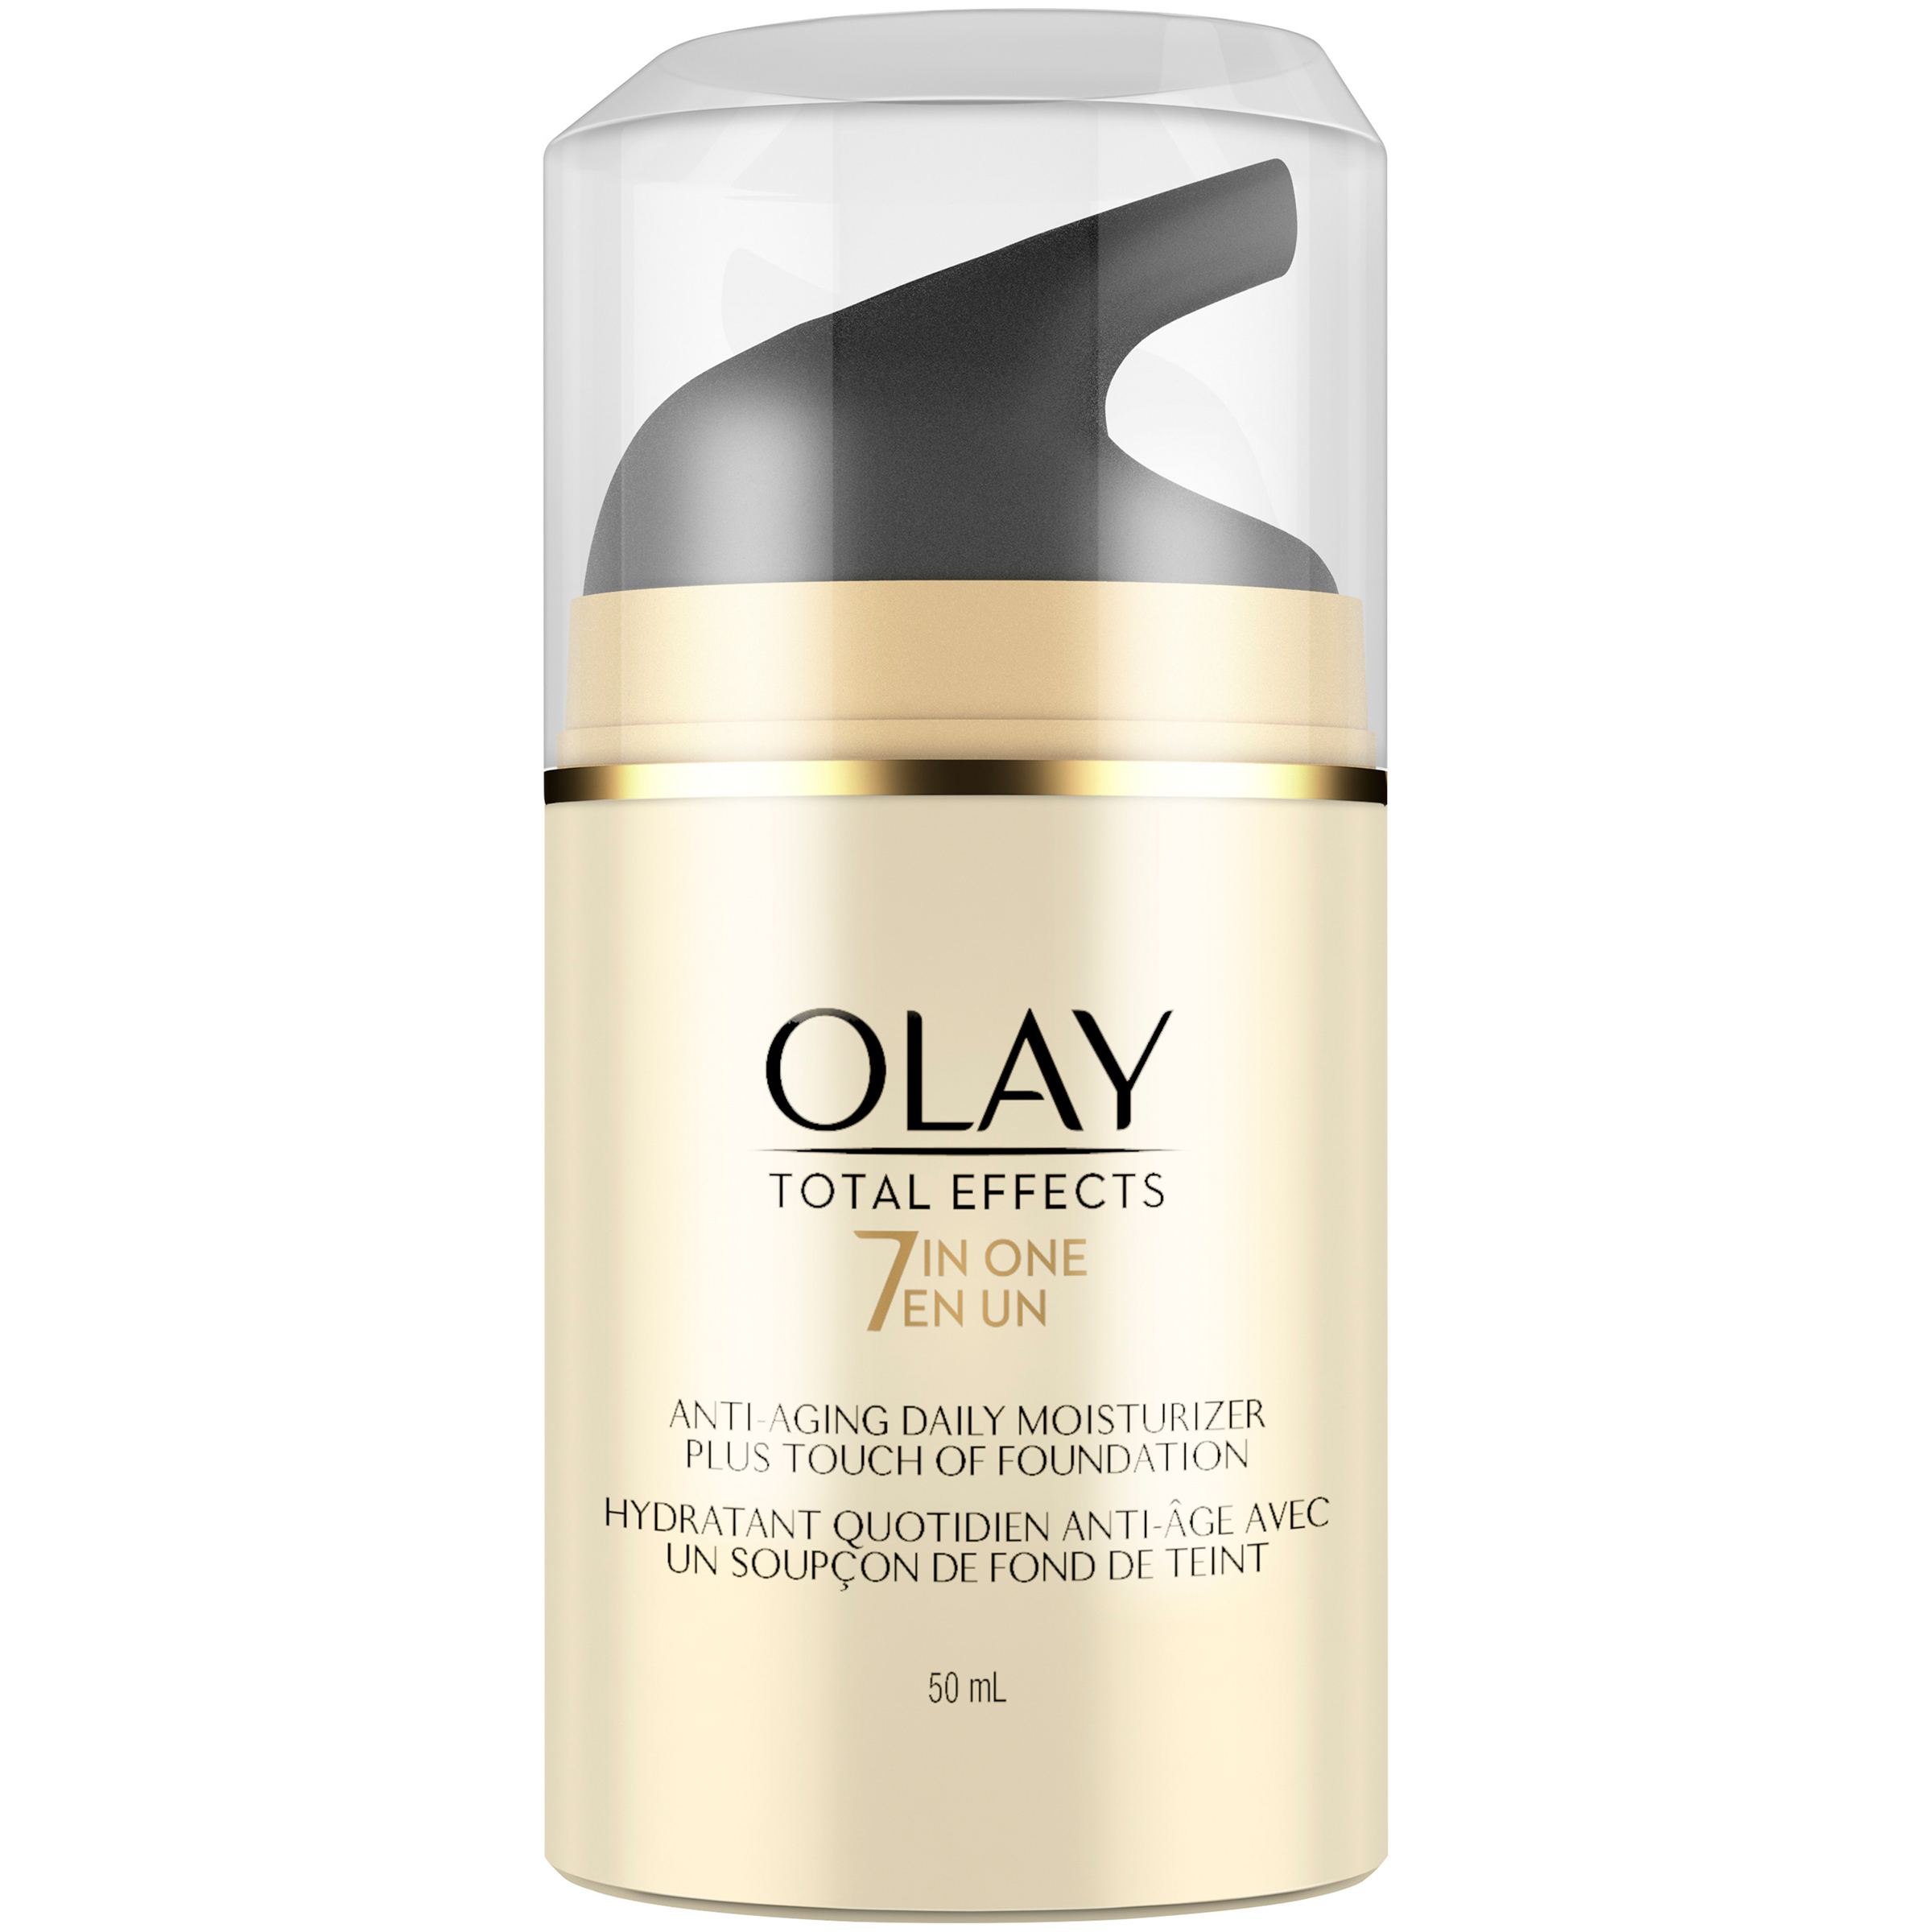 Olay Total Effects Anti-Aging CC Cream, Moisturizer Plus Touch of Foundation 1.7 fl oz